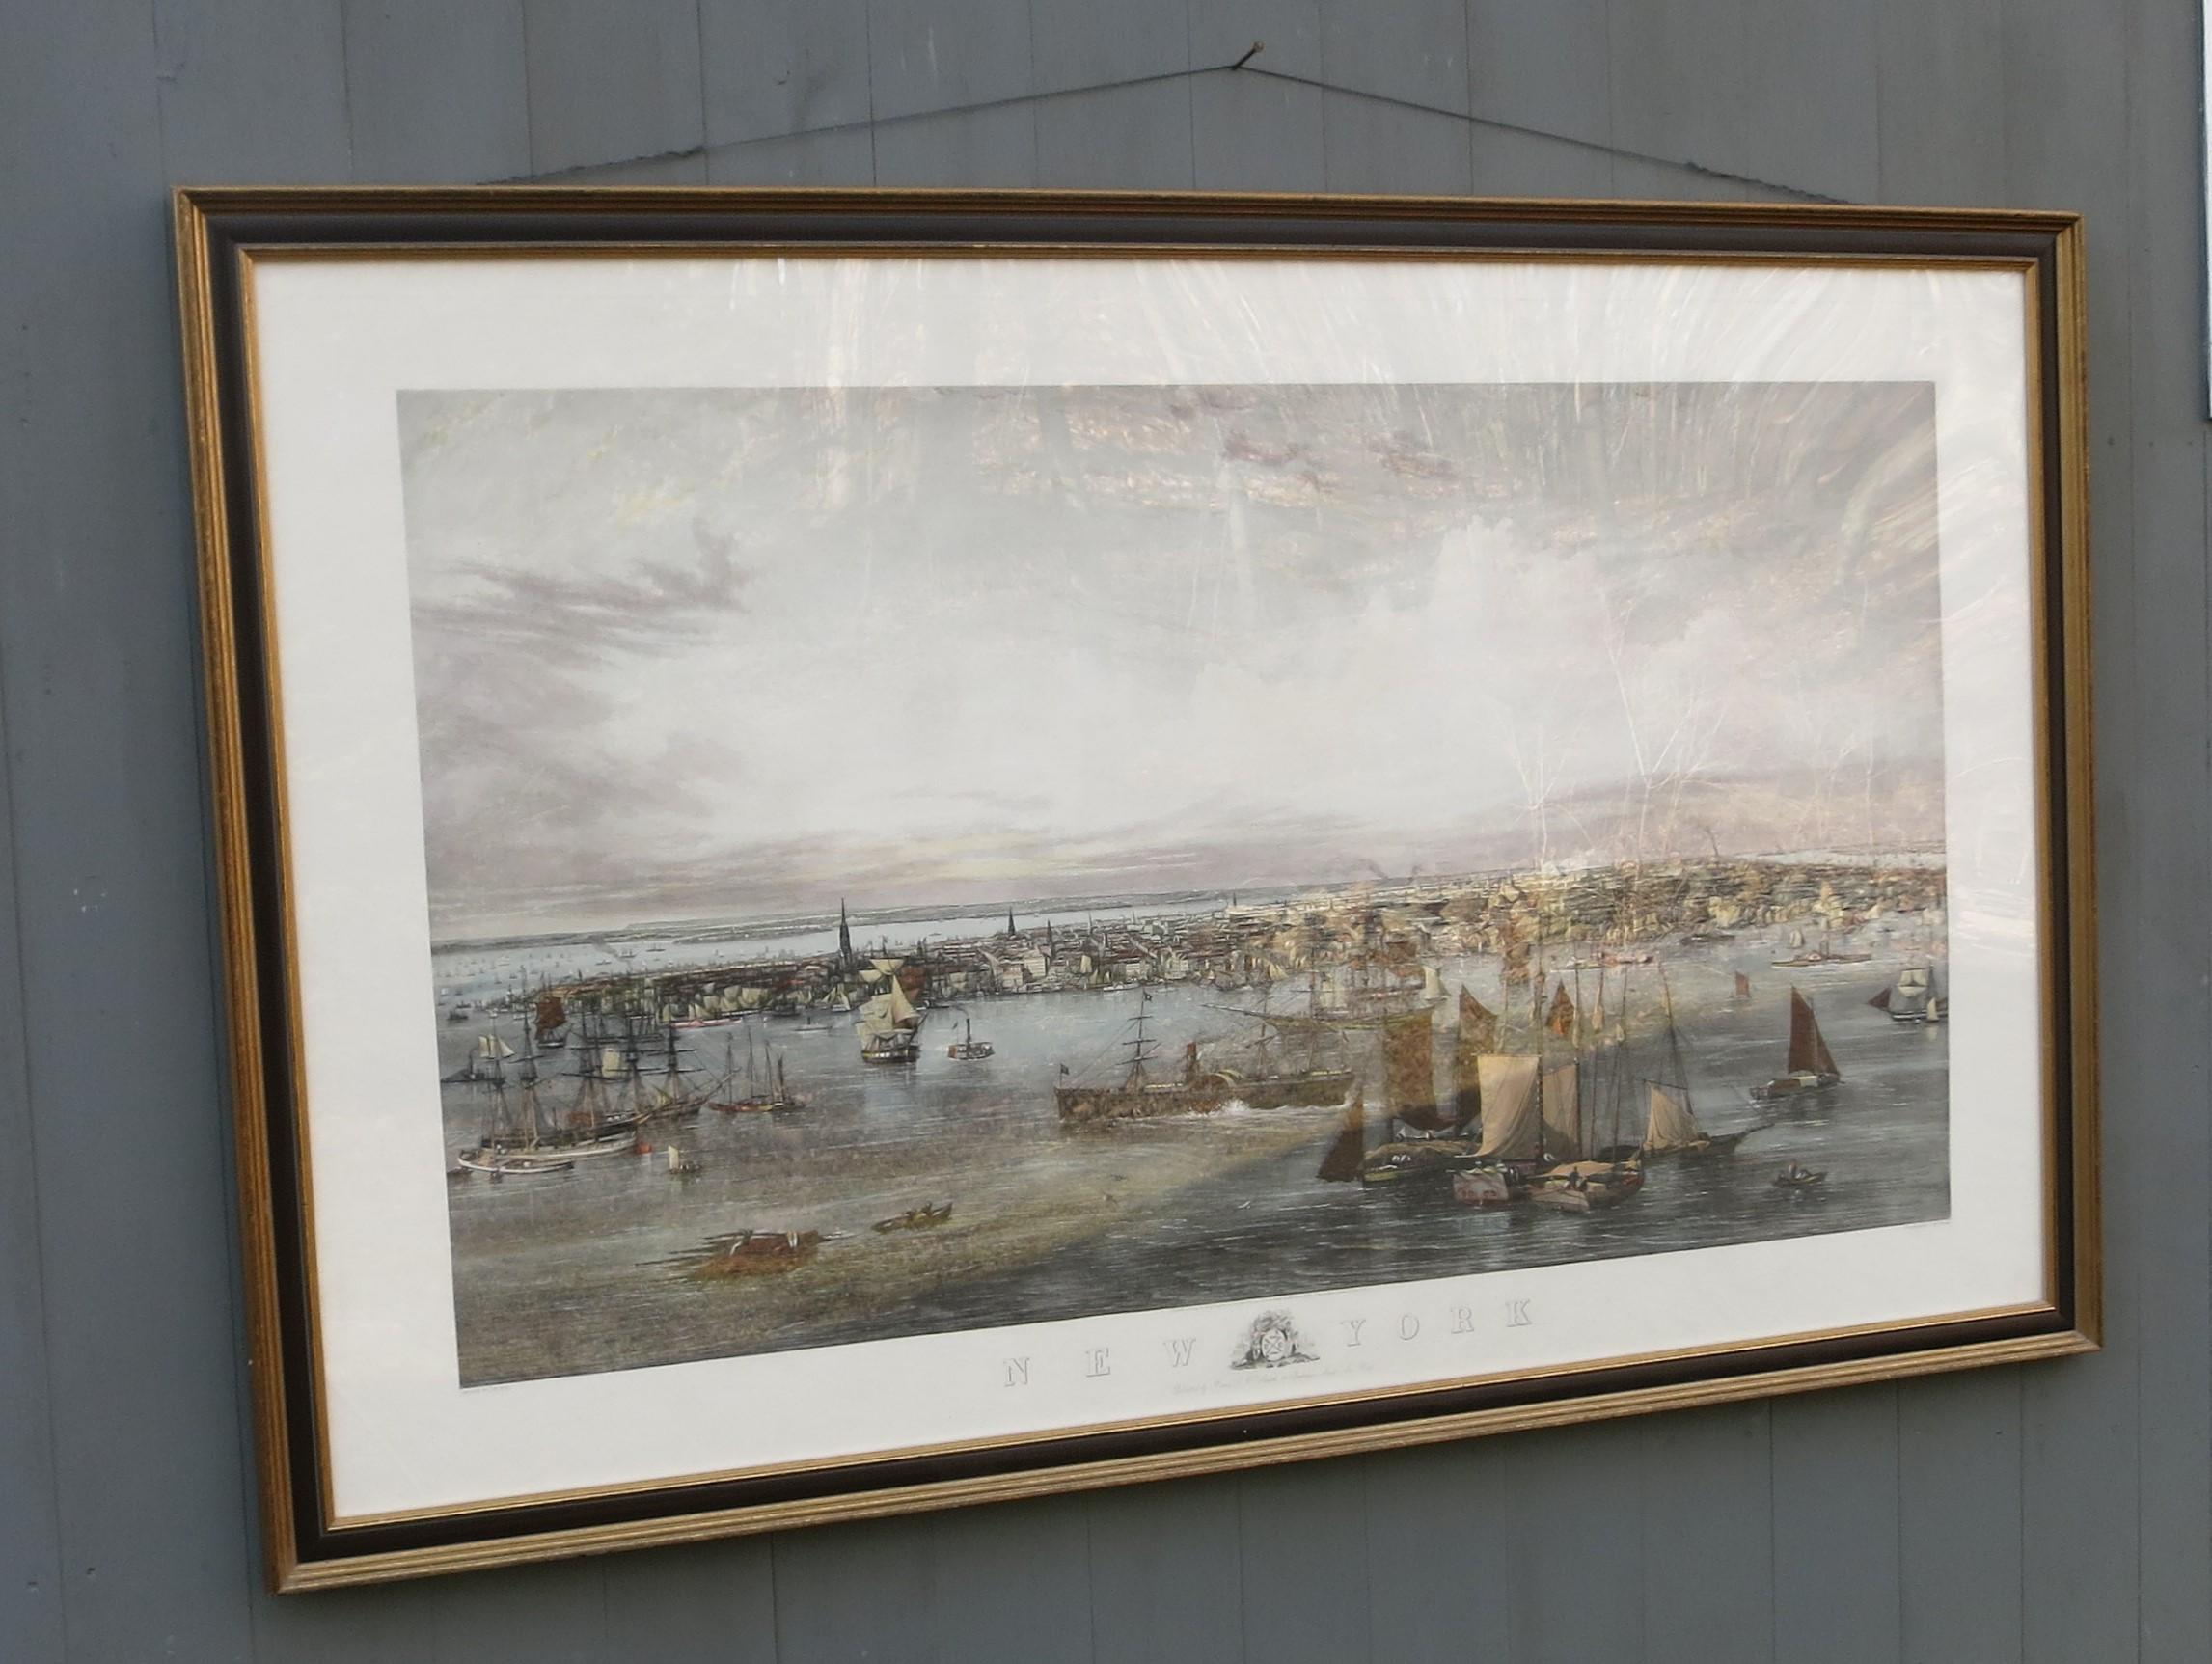 New York Harbor print. Reprint of 19th century painting by JW Hill and engraved by C. Mottram. It is 62